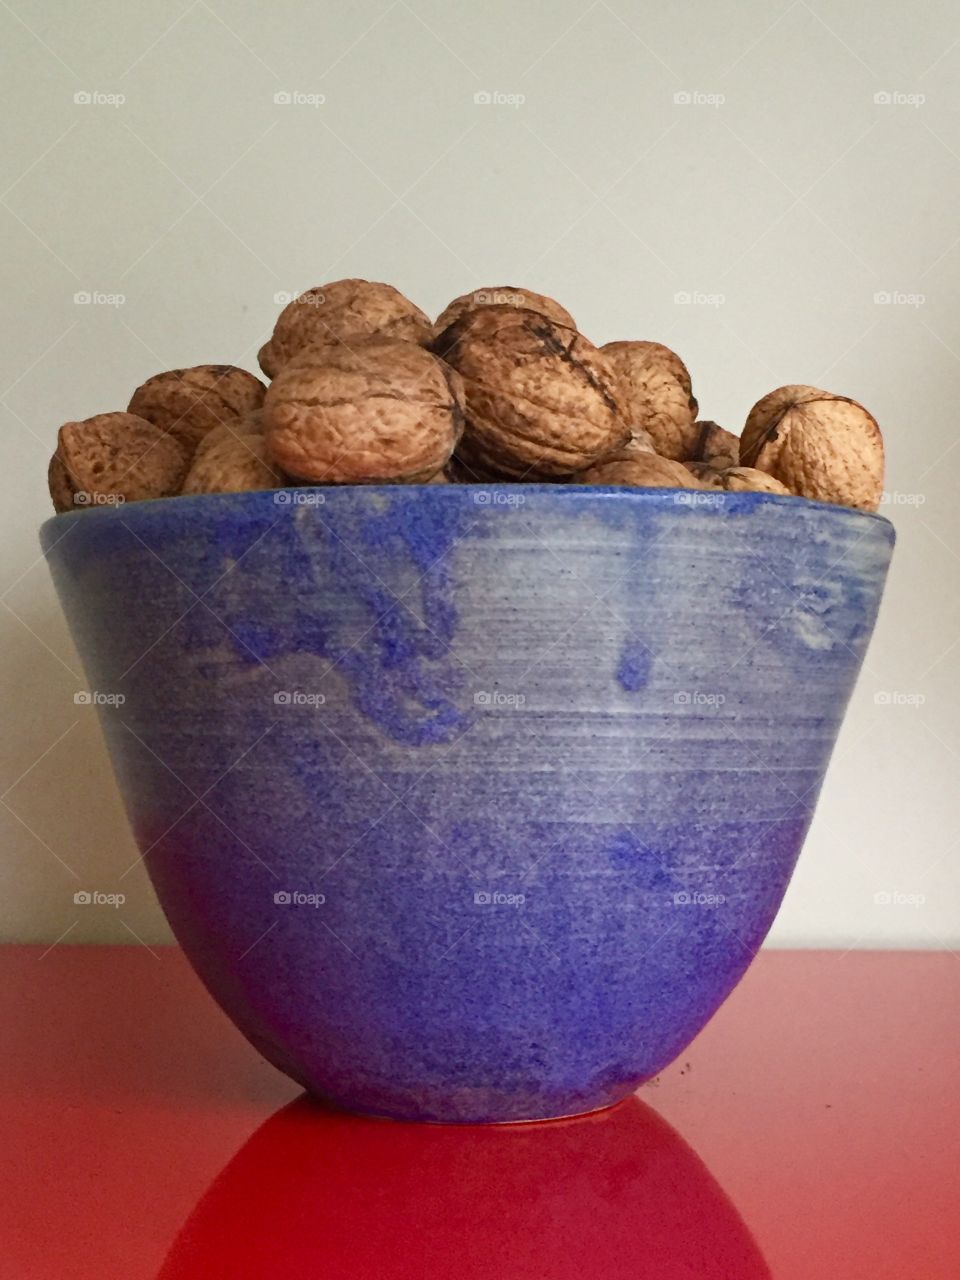 Nuts in a blue bowl